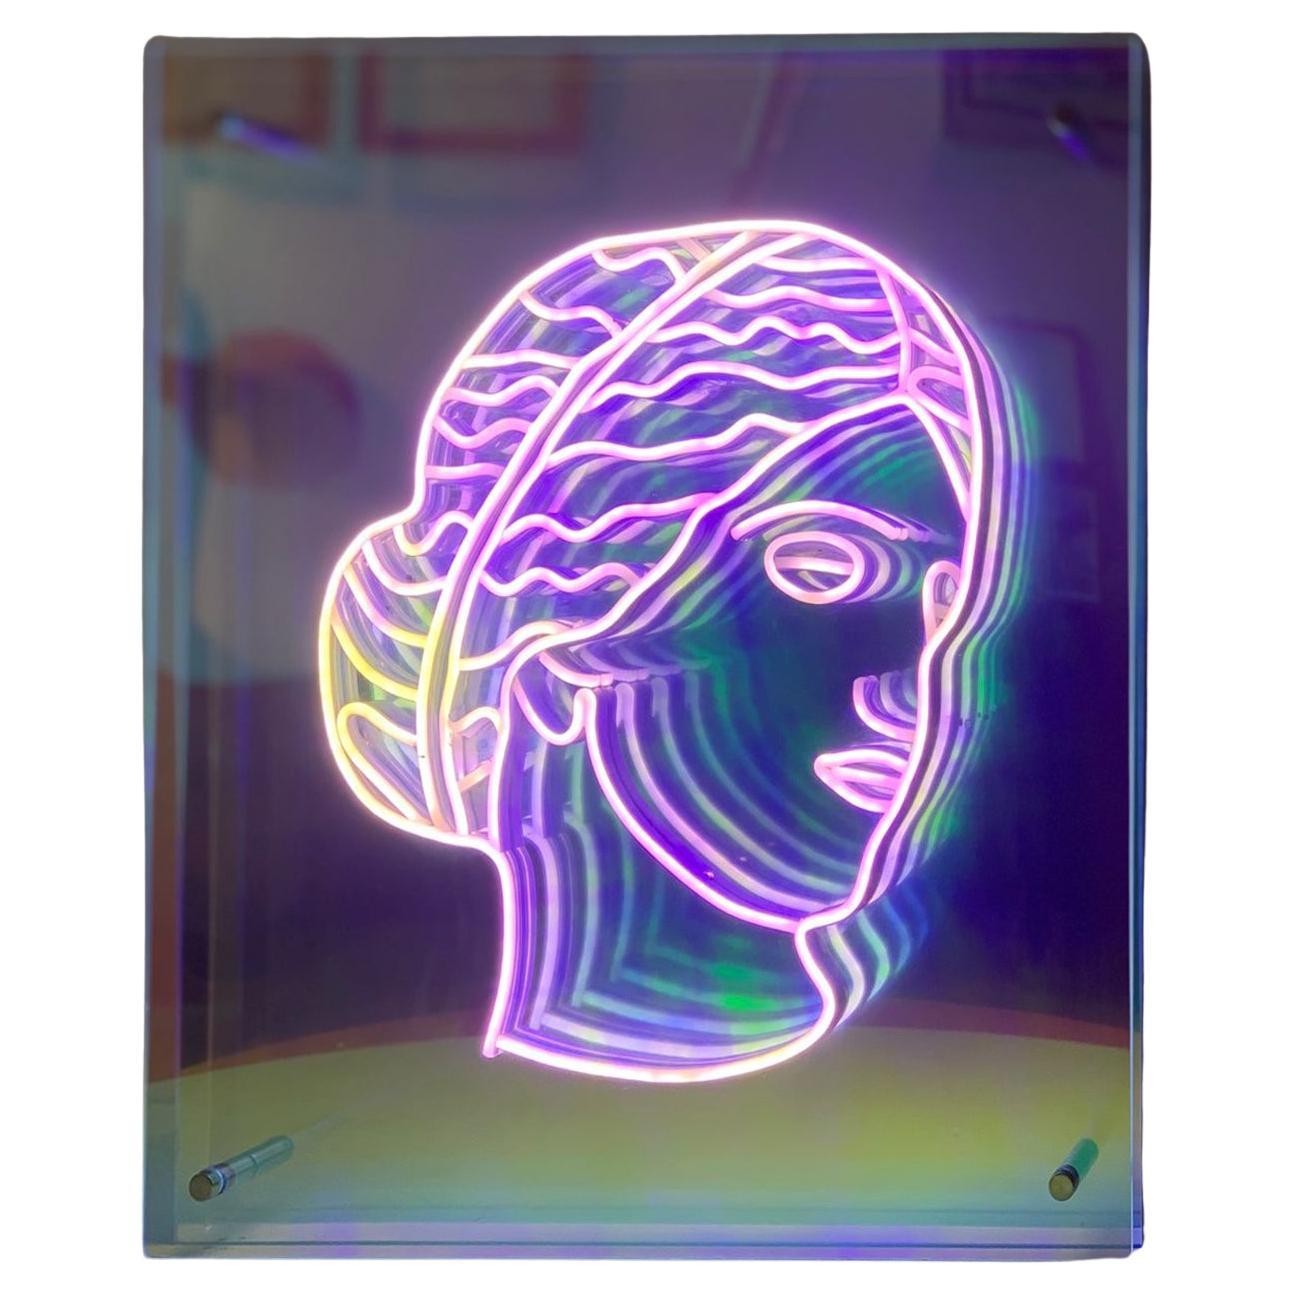 Infinite Aphrodite Sculpture. From the series Neon Classics For Sale